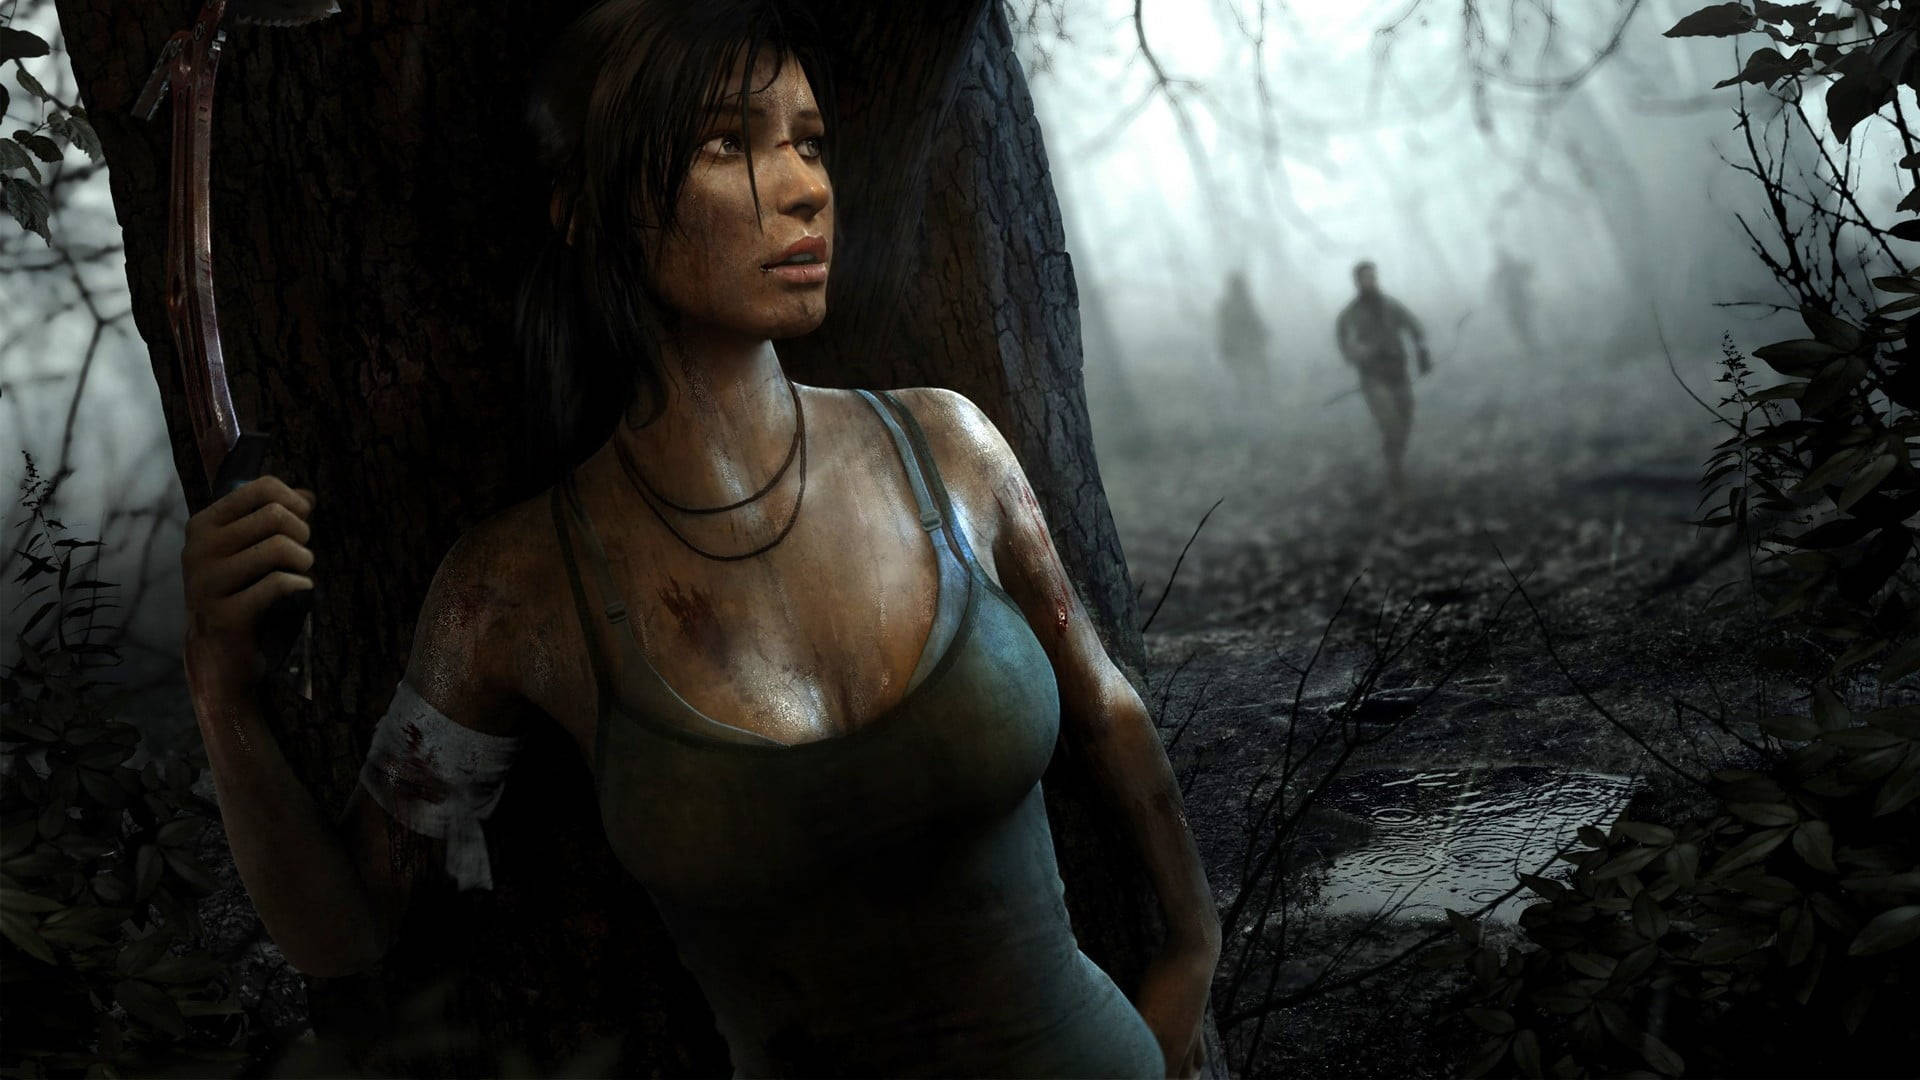 Rise Of The Tomb Raider - Lara Croft In Stealth Mode Background